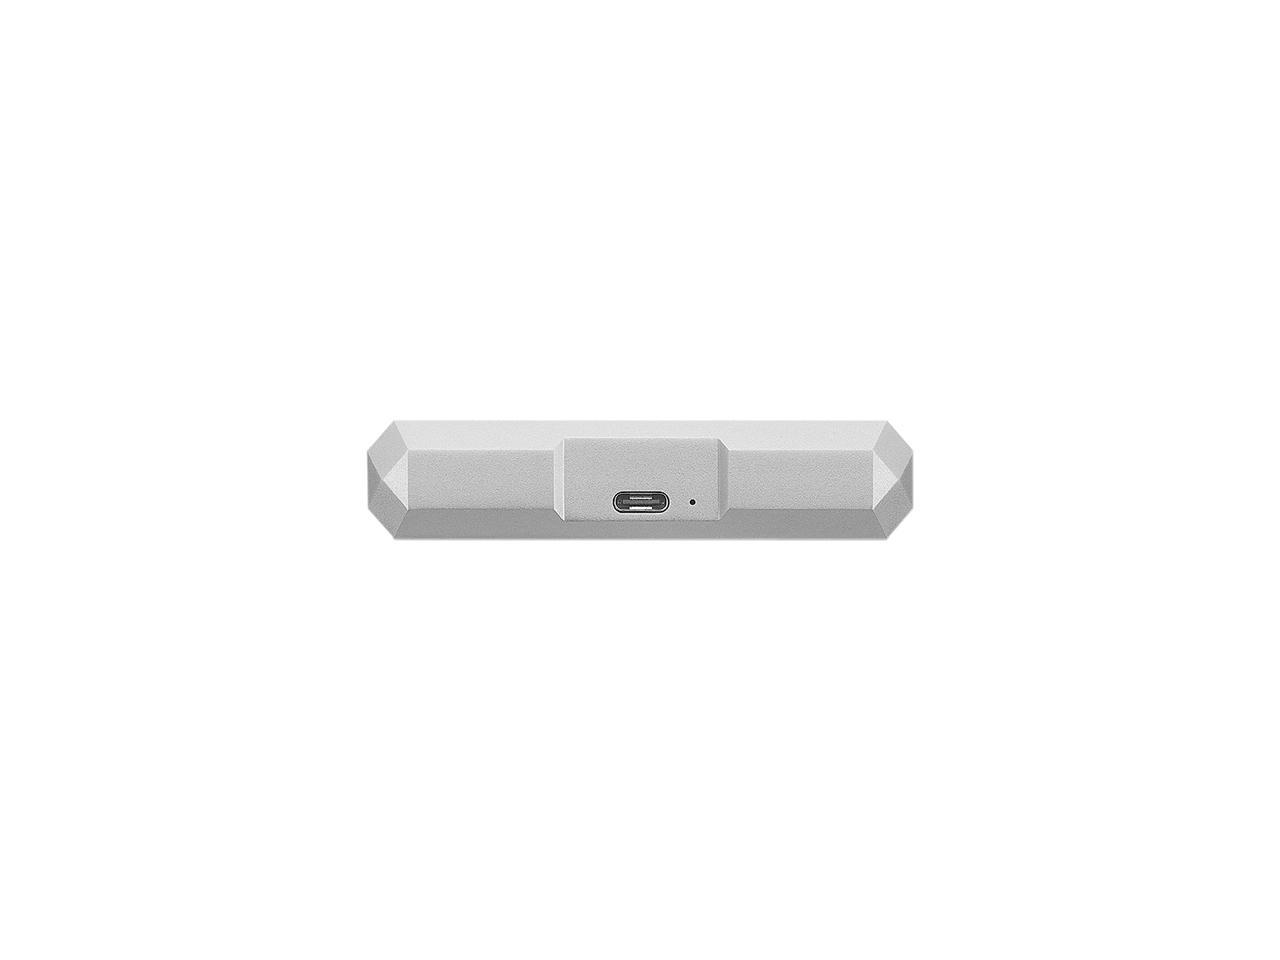 Lacie Mobile Drive 5Tb External Hard Drive Portable Hdd - Moon Silver Usb-C Usb 3.0, For Mac And Pc Desktop, 1 Month Adobe Cc (Sthg5000400)